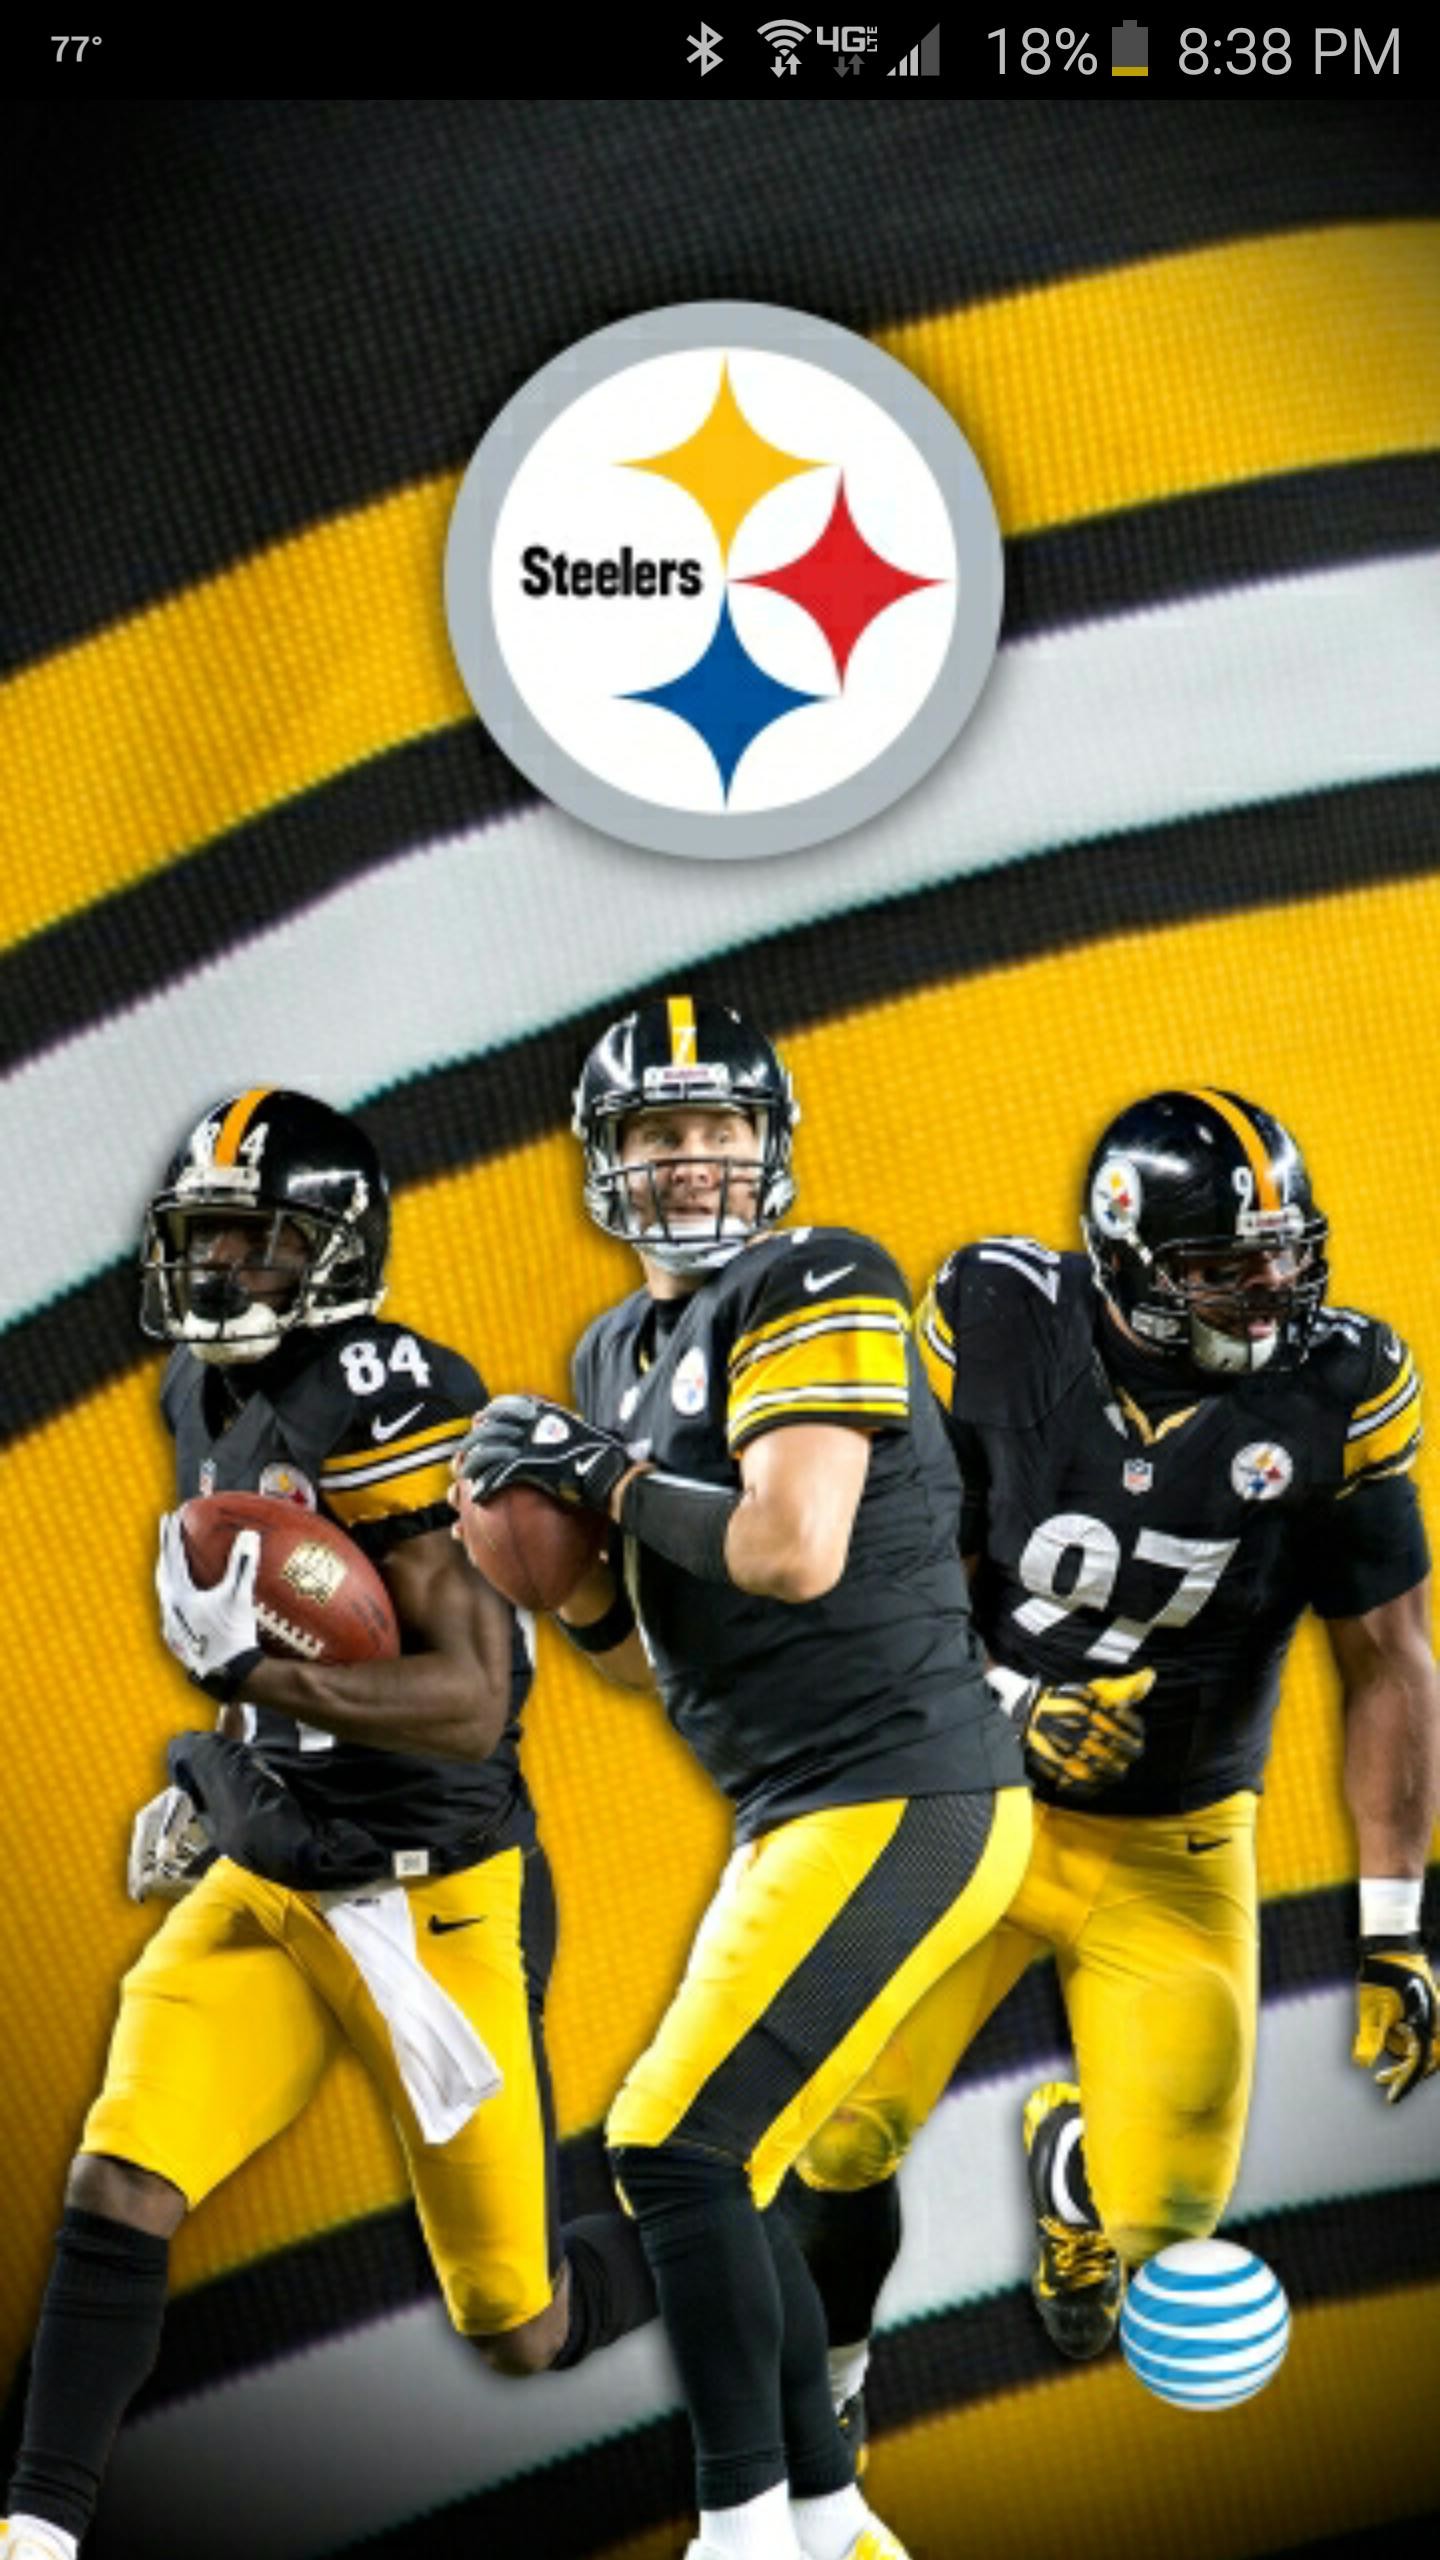 1440x2560 Thanks Official Steelers App for the kickass lock screen background! (Comes  with or without the players) ...